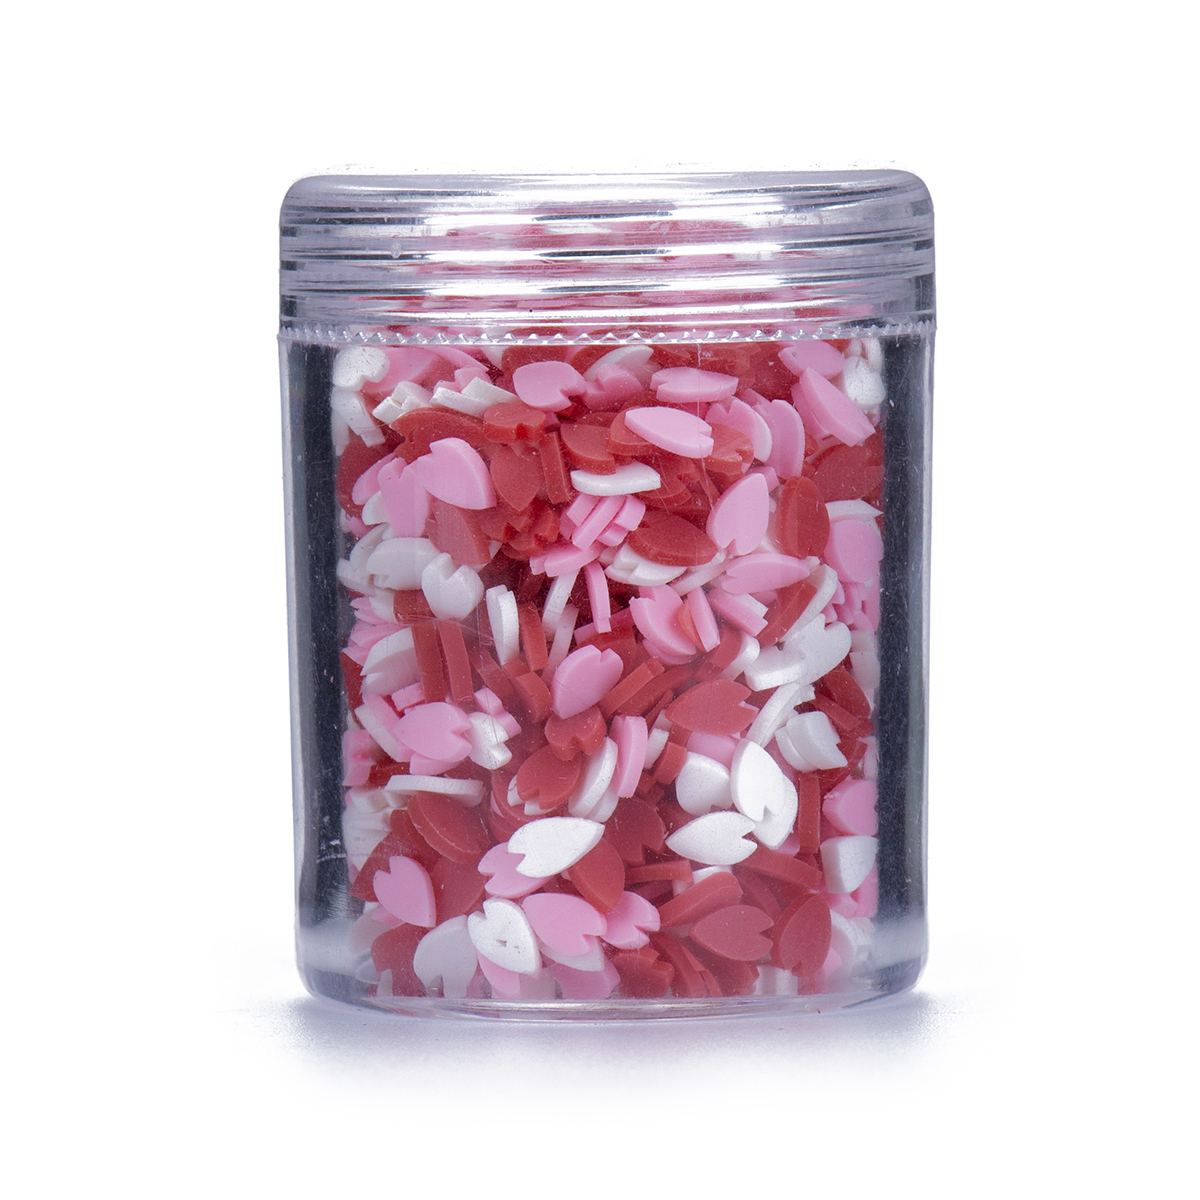 20g Pink Hearts Confetti Mix Ins For Epoxy Resin Art In Tubs Pour Craft